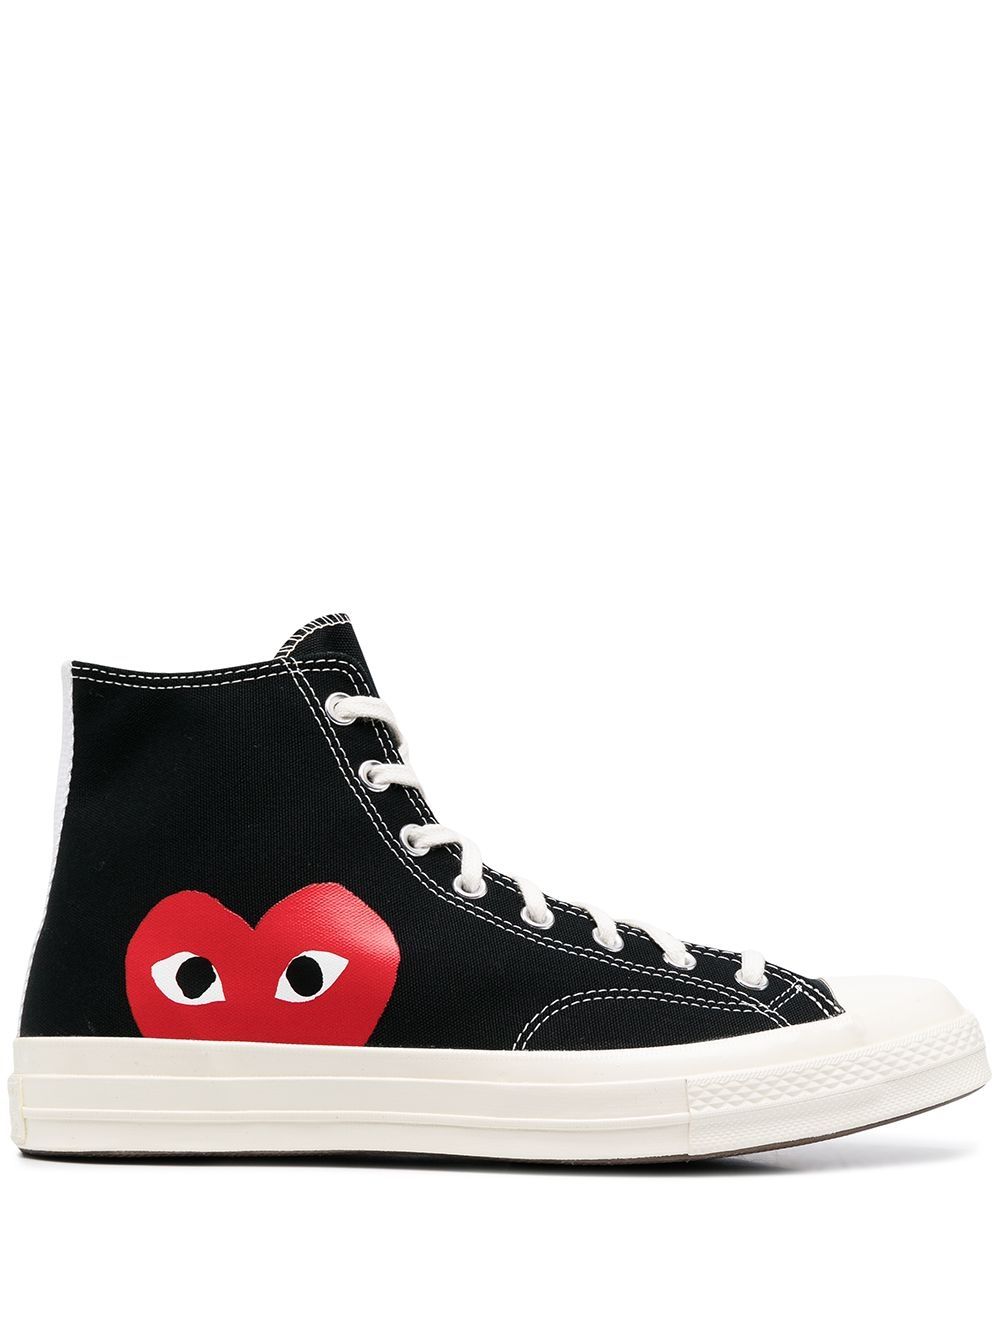 Black/red/white canvas x Converse high-top sneakers